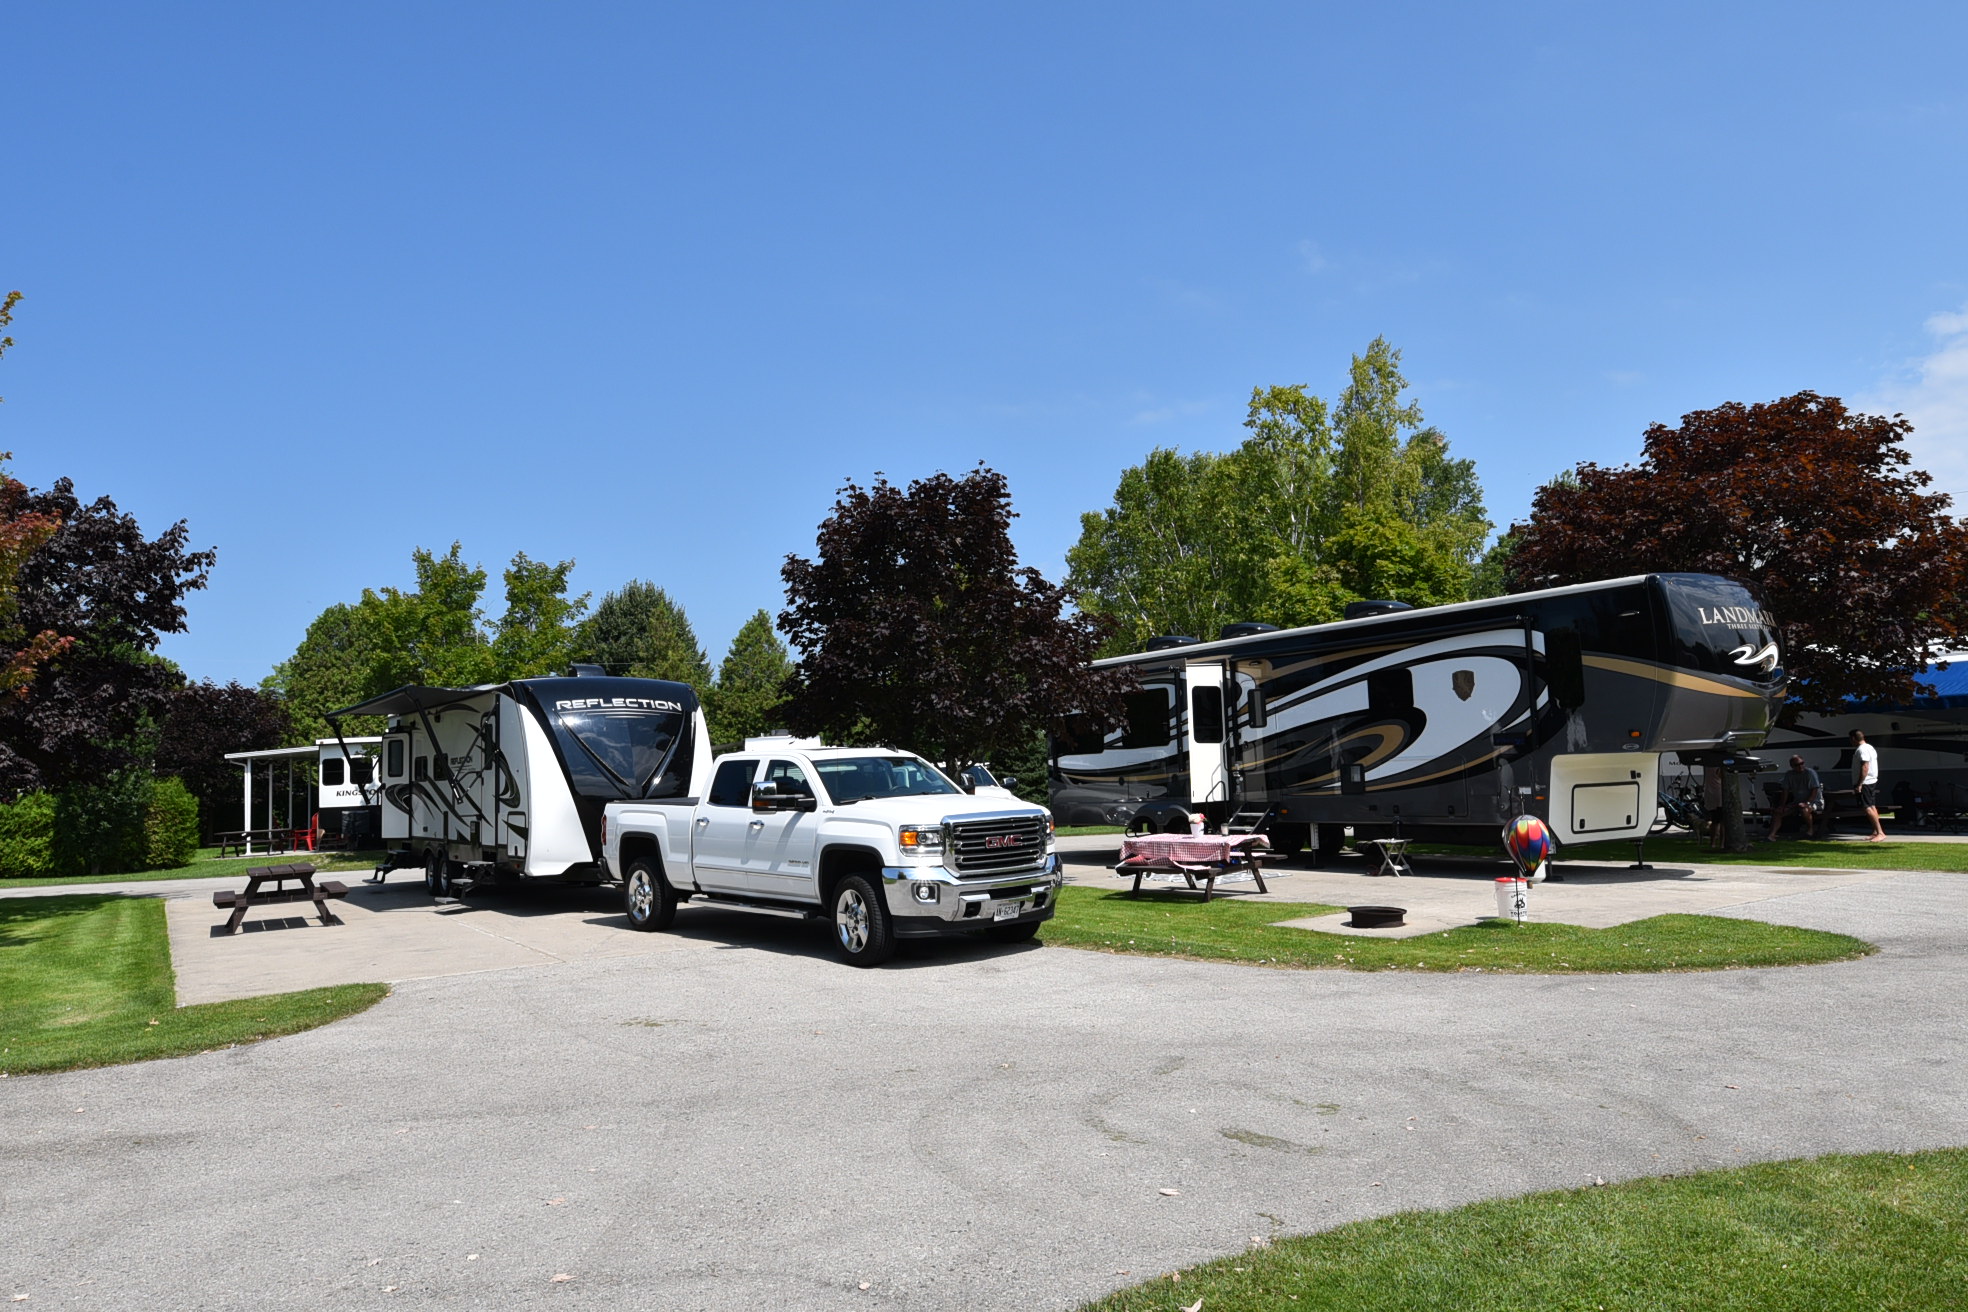 Travel Trailer and Fifth-wheel in adjacent spaces.